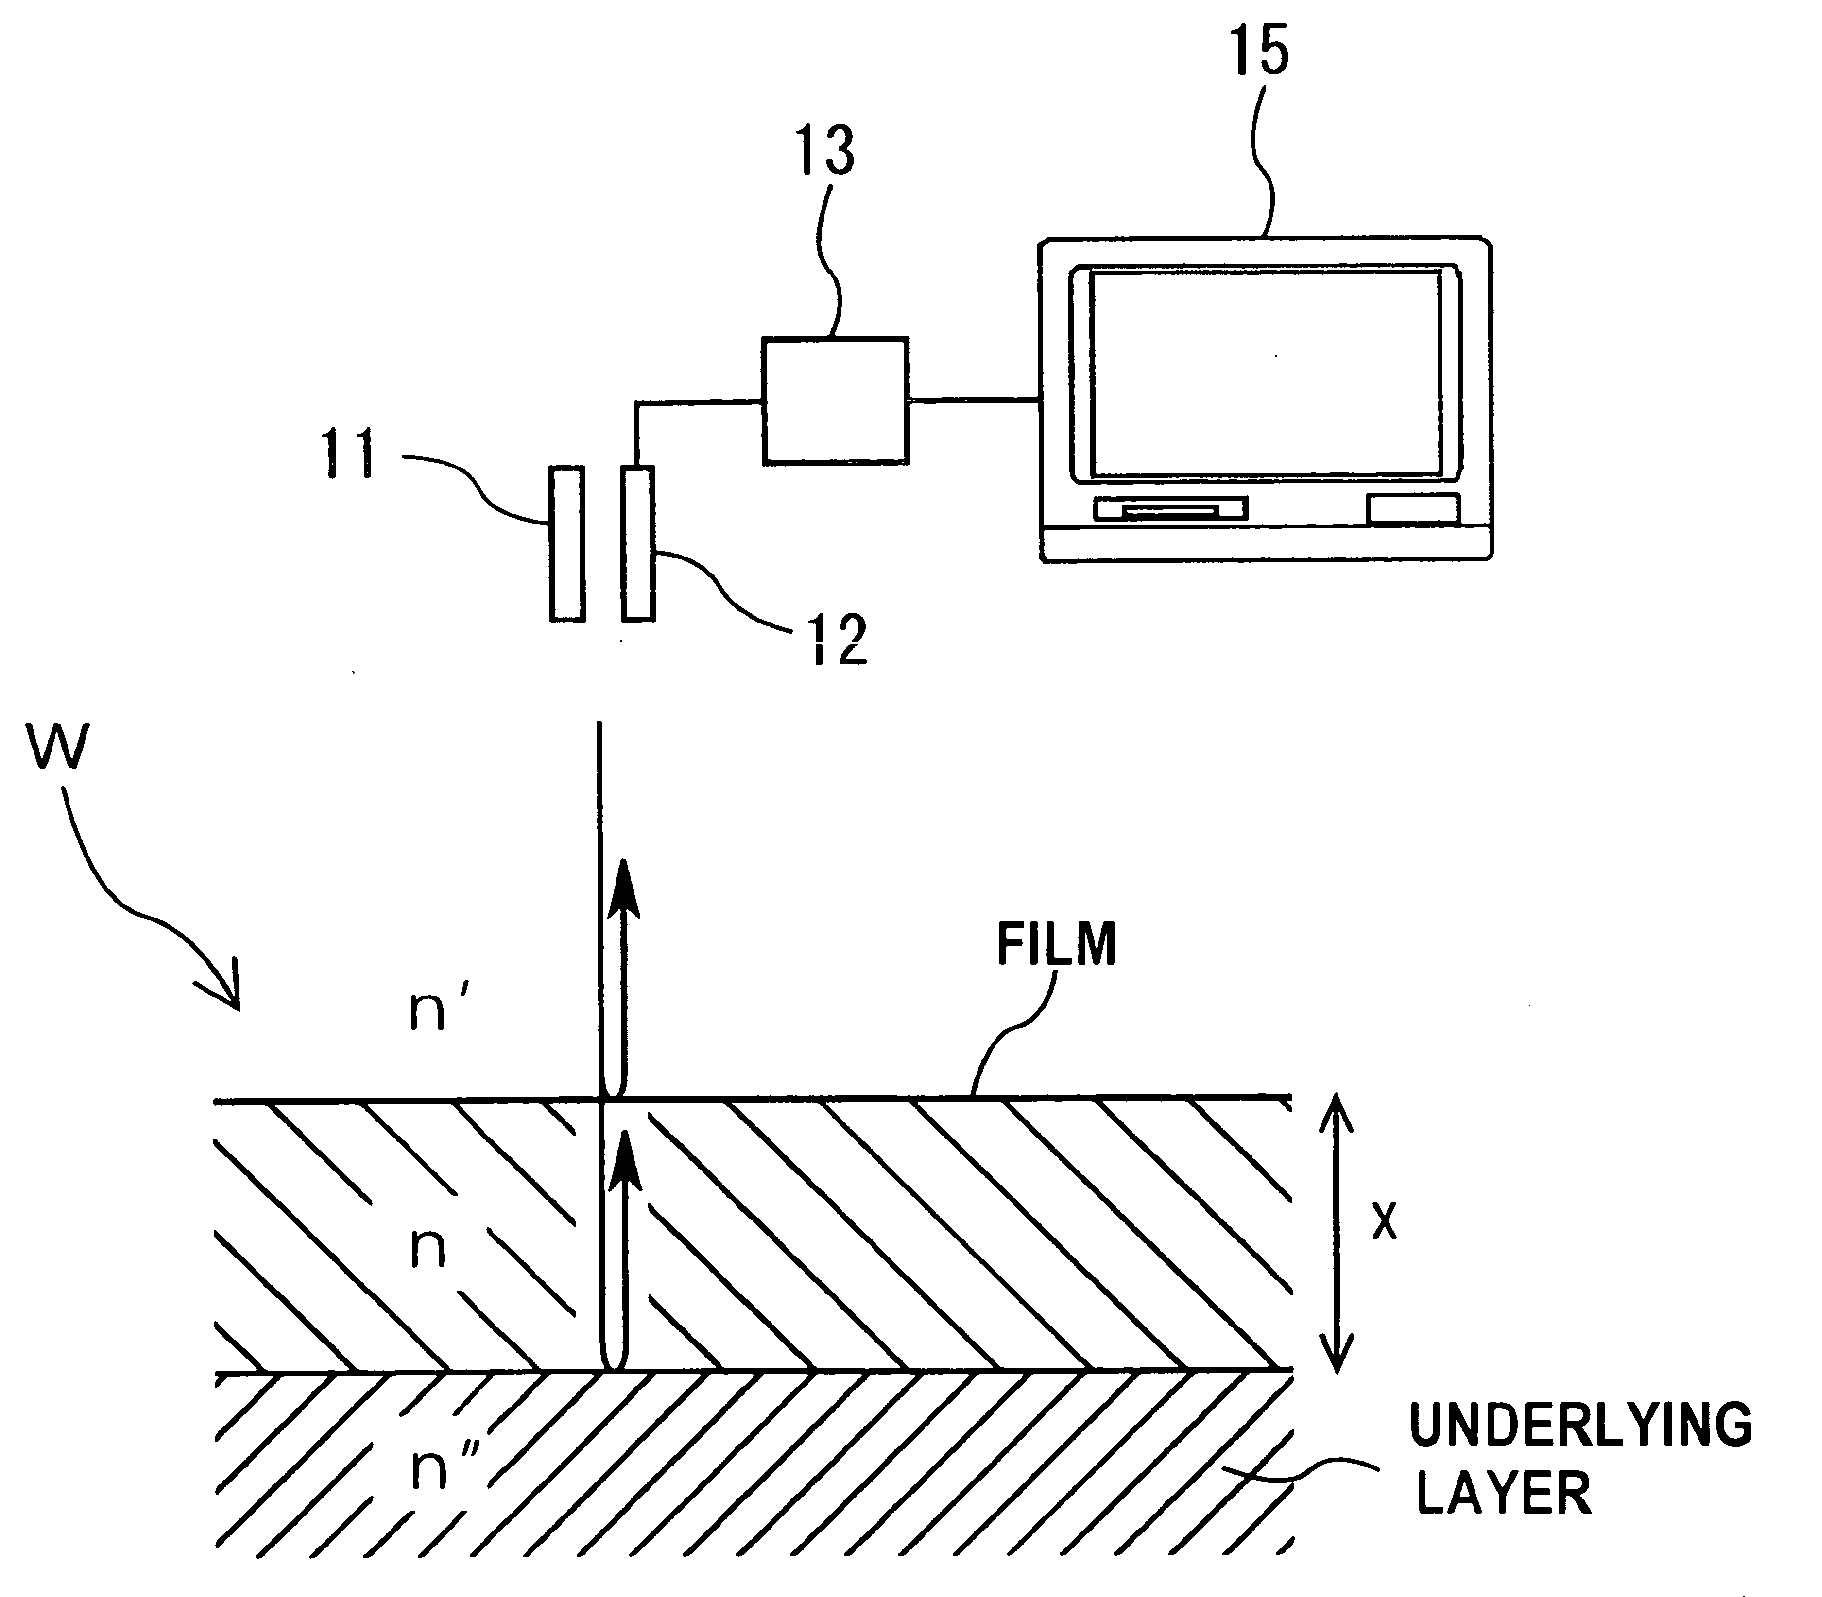 Method of making diagram for use in selection of wavelength of light for polishing endpoint detection, method and apparatus for selecting wavelength of light for polishing endpoint detection, polishing endpoint detection method, polishing endpoint detection apparatus, and polishing monitoring method